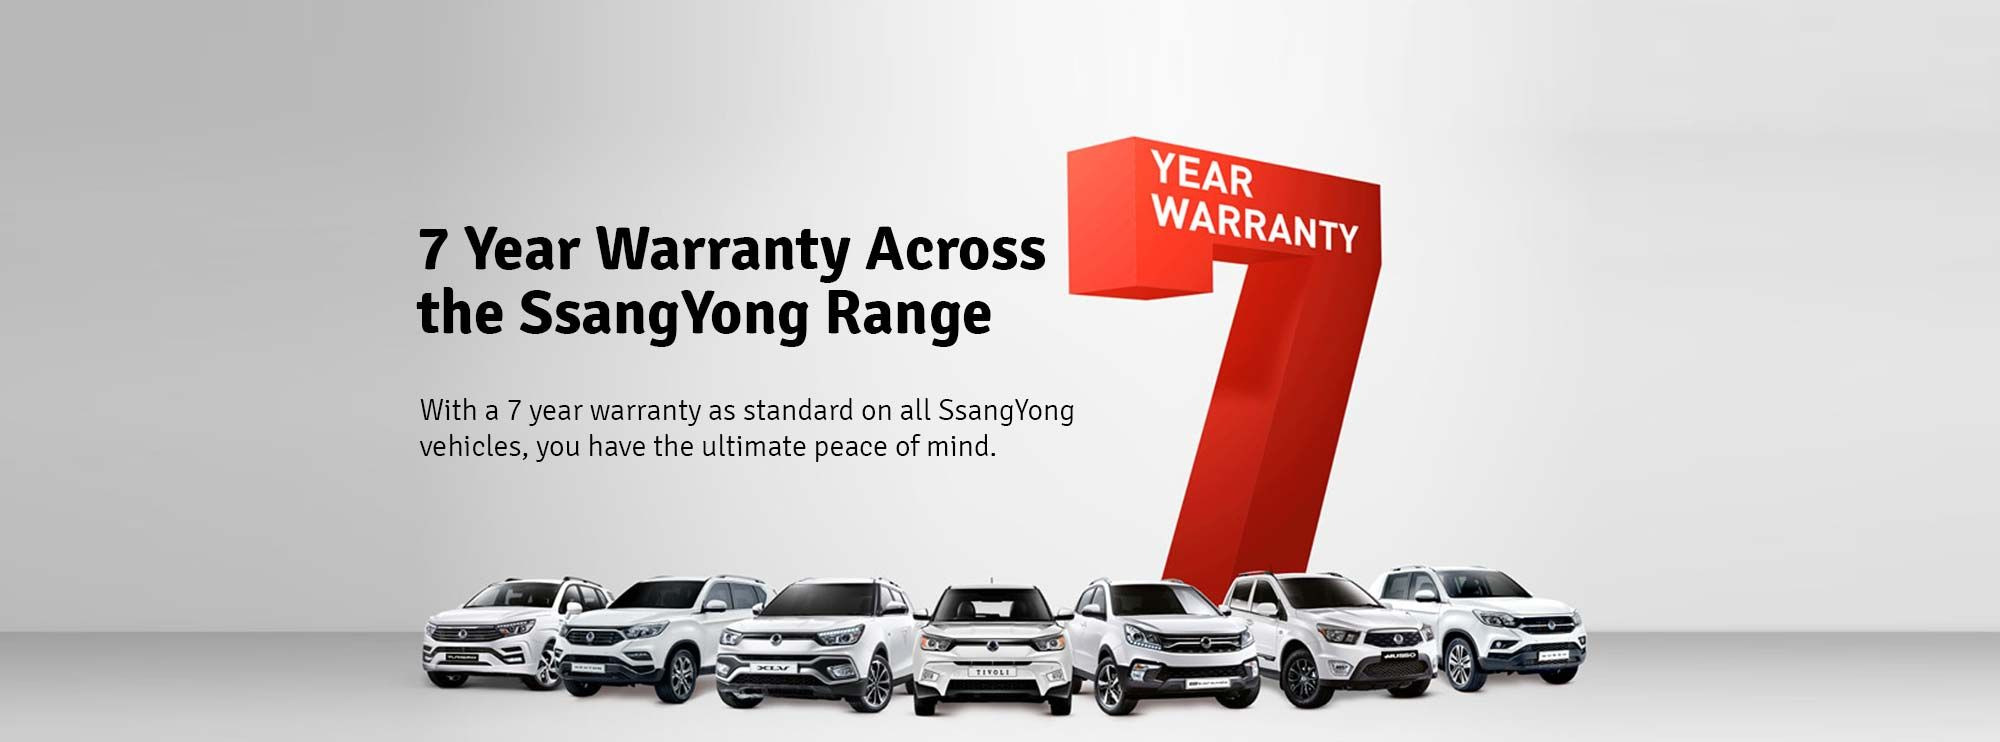 SsangYong Warranty